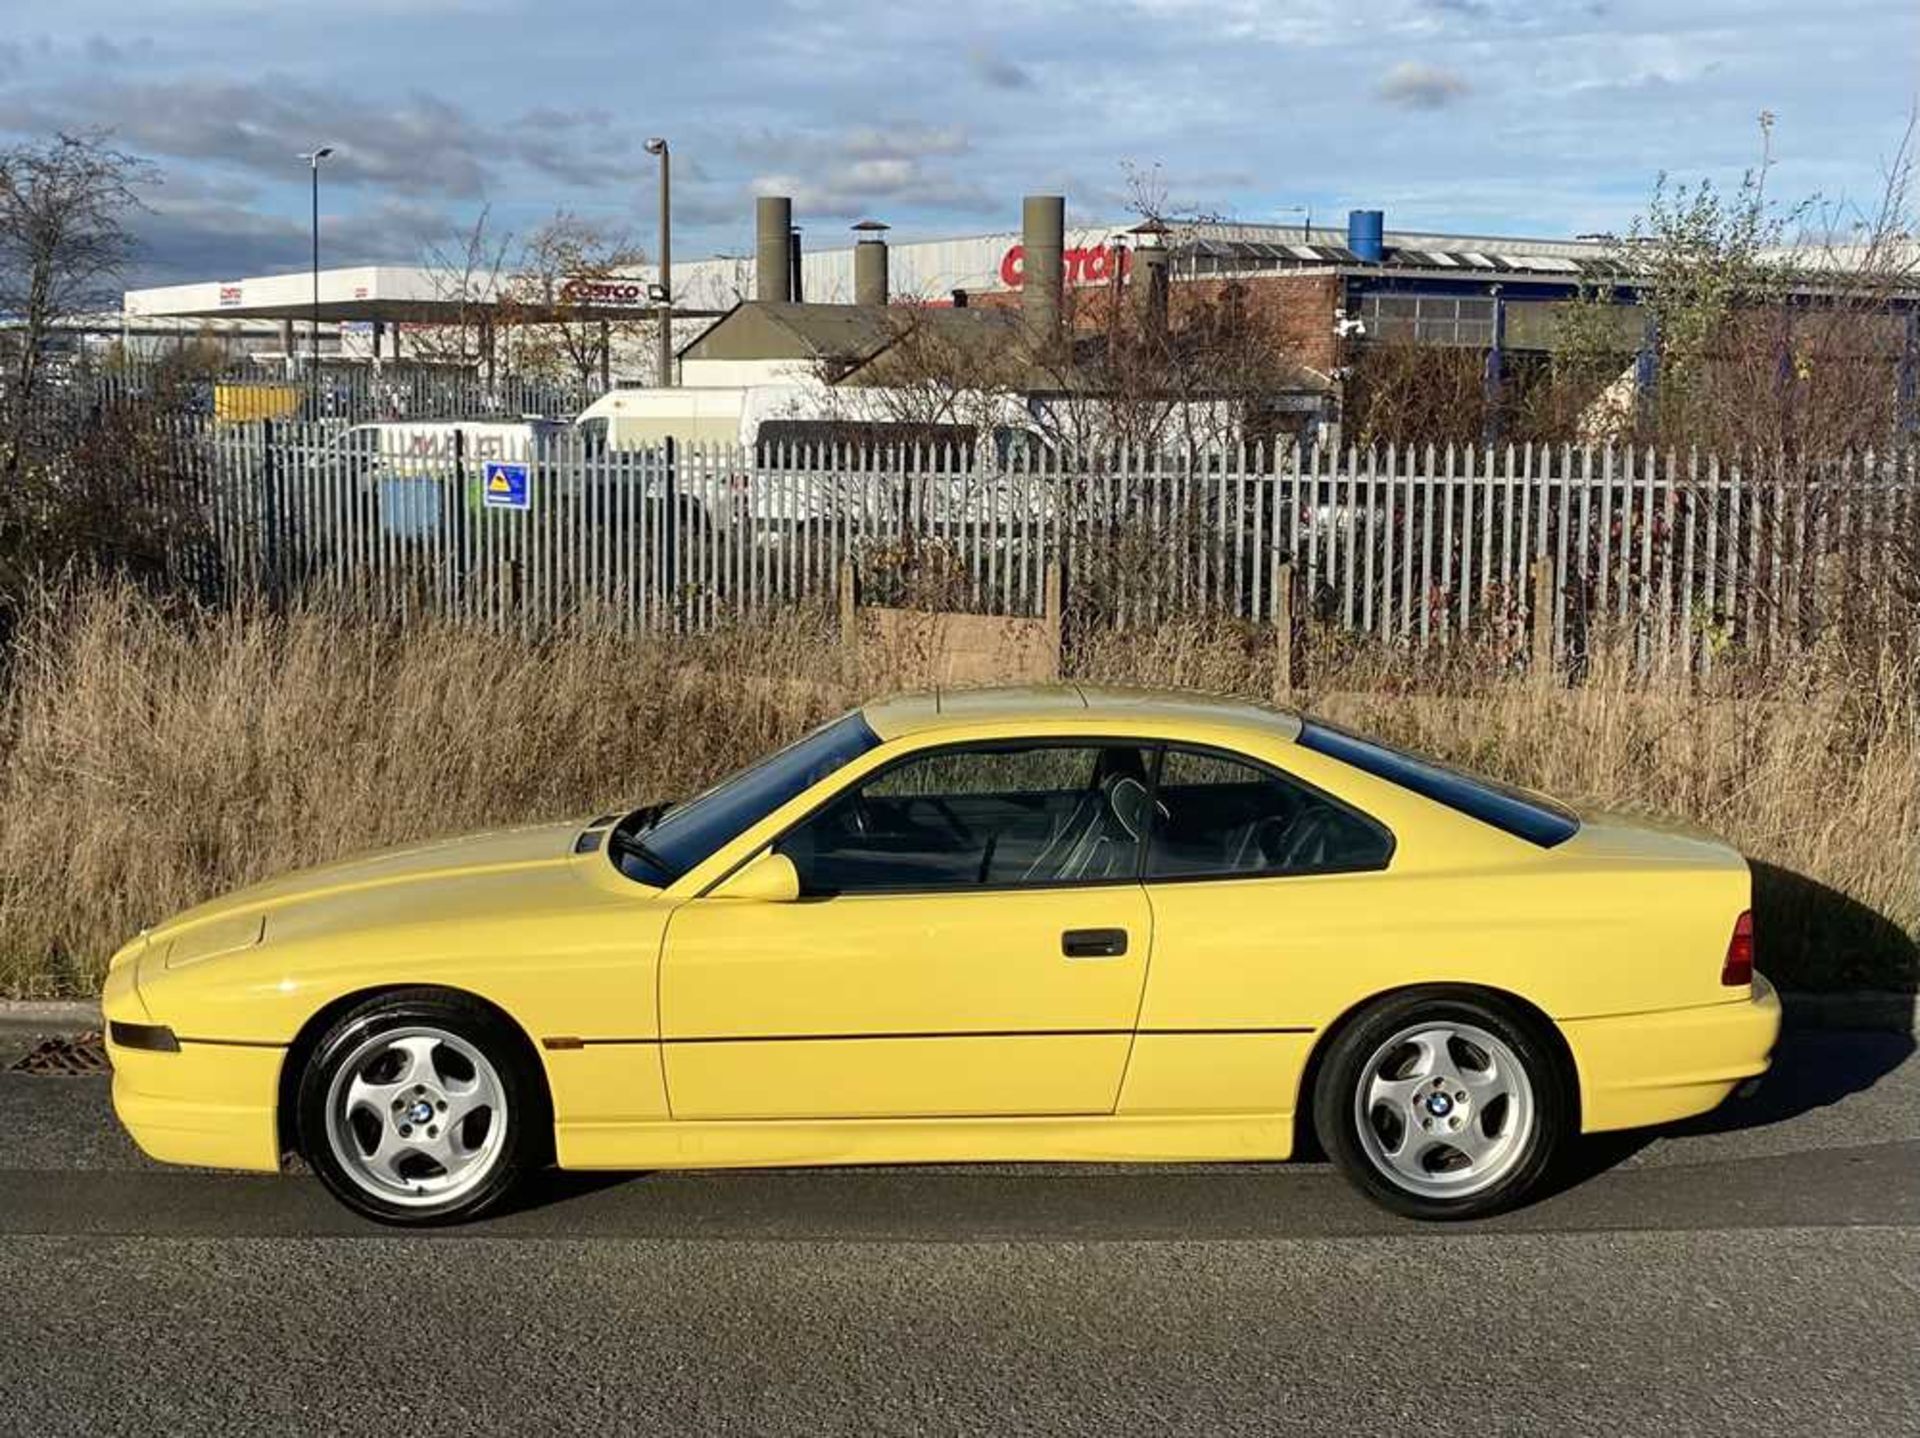 1997 BMW 840 CI Sport Understood to be 1 of just 38 finished in Dakar Yellow II - Image 76 of 79